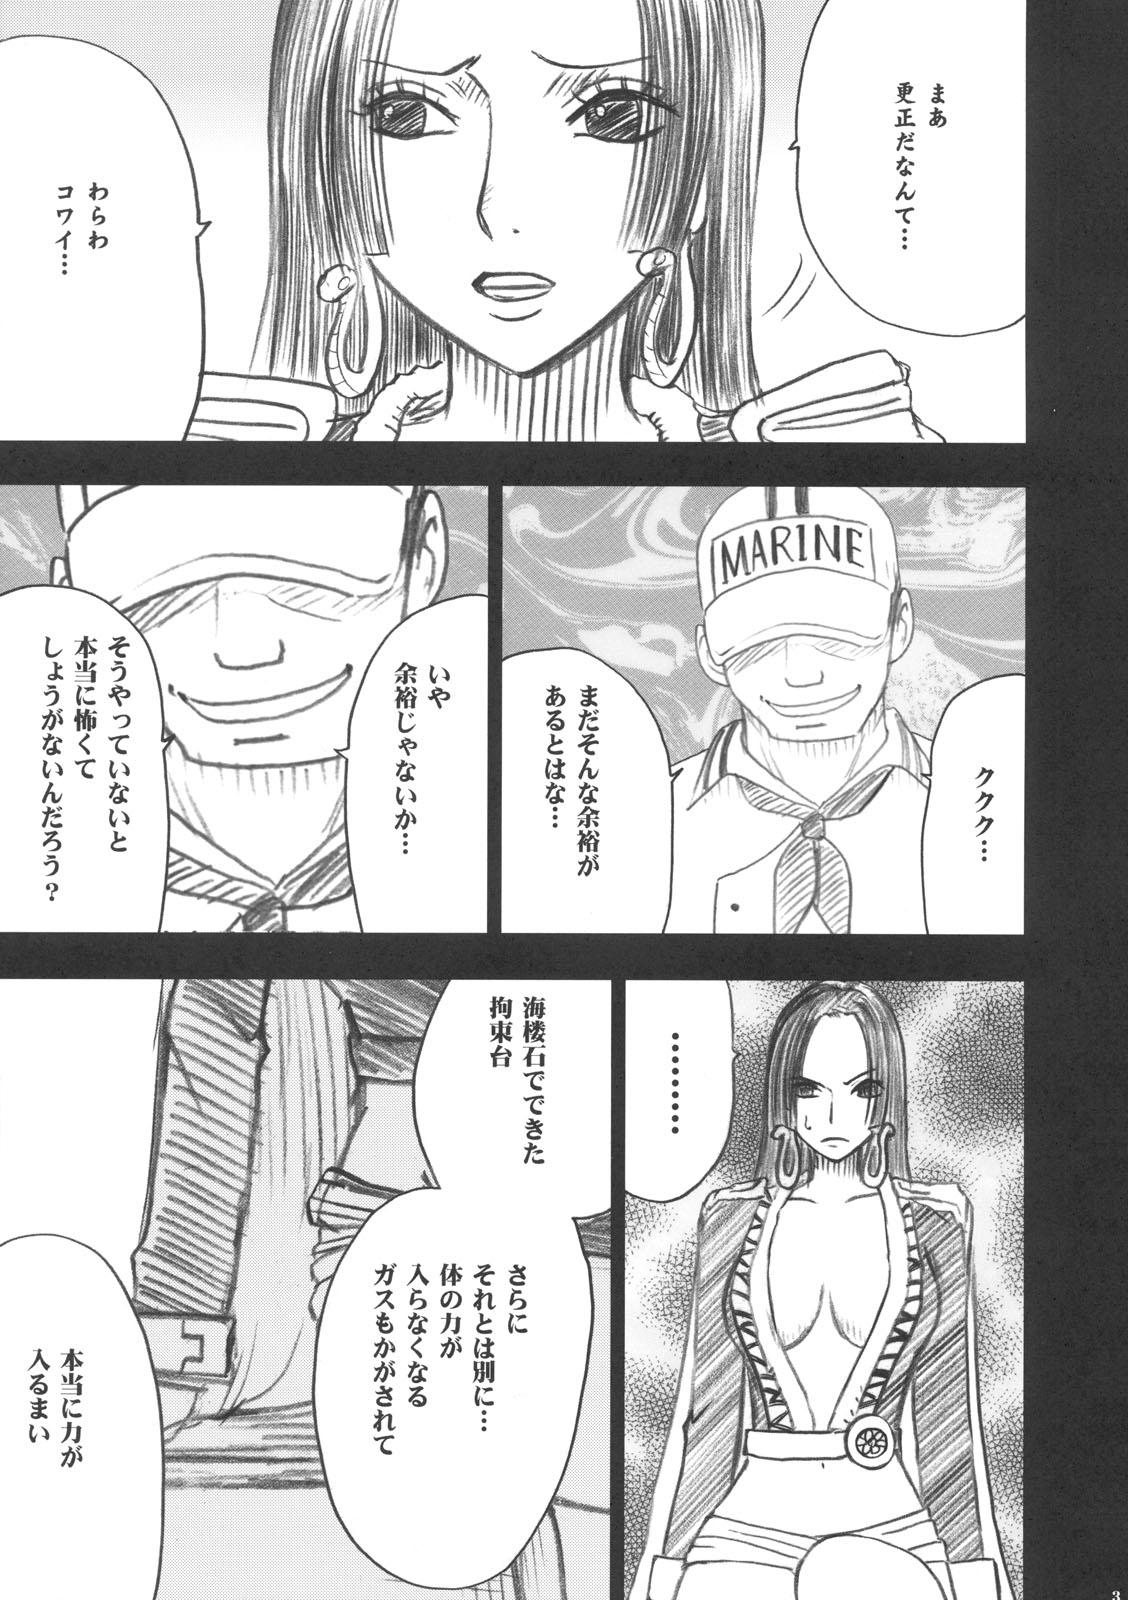 Milk Hebi-hime - One piece Rimming - Page 4